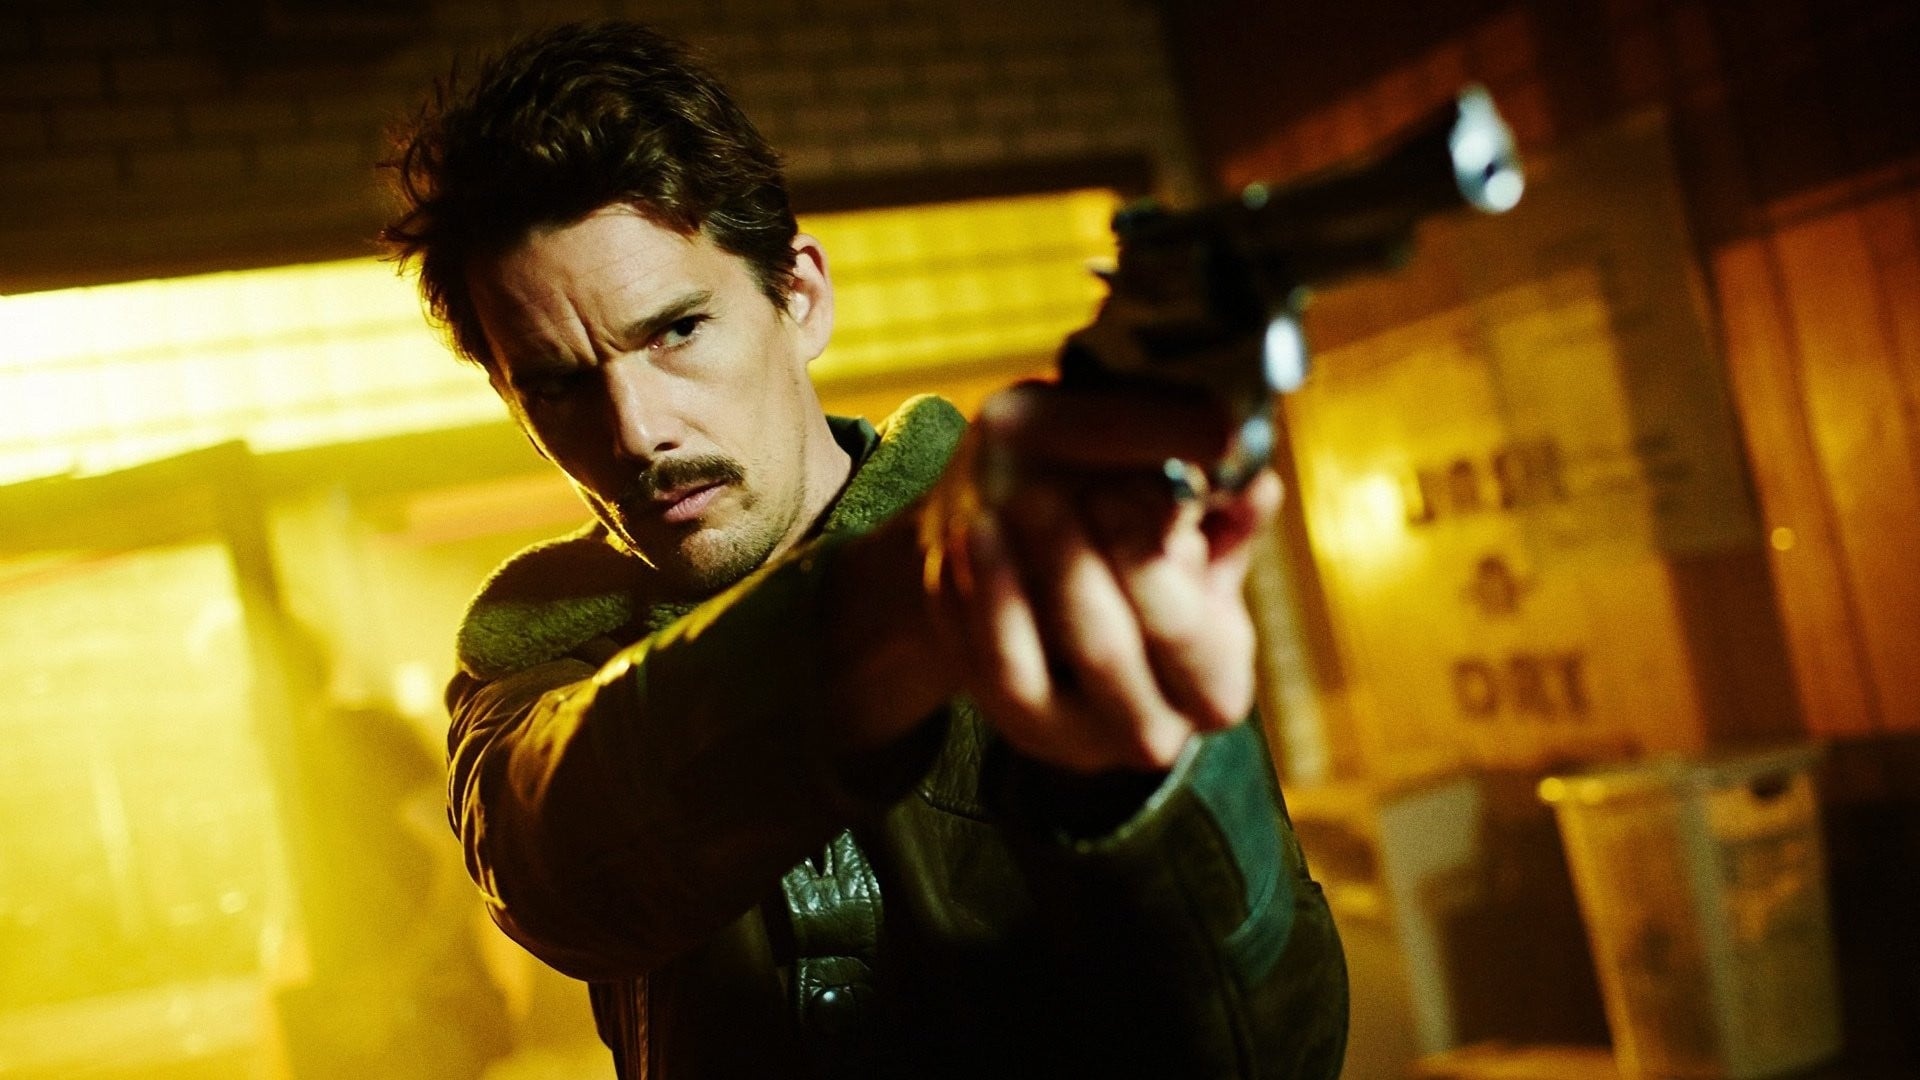 Predestination backdrops, Immersive movie experience, Gripping thriller, Database curated images, 1920x1080 Full HD Desktop